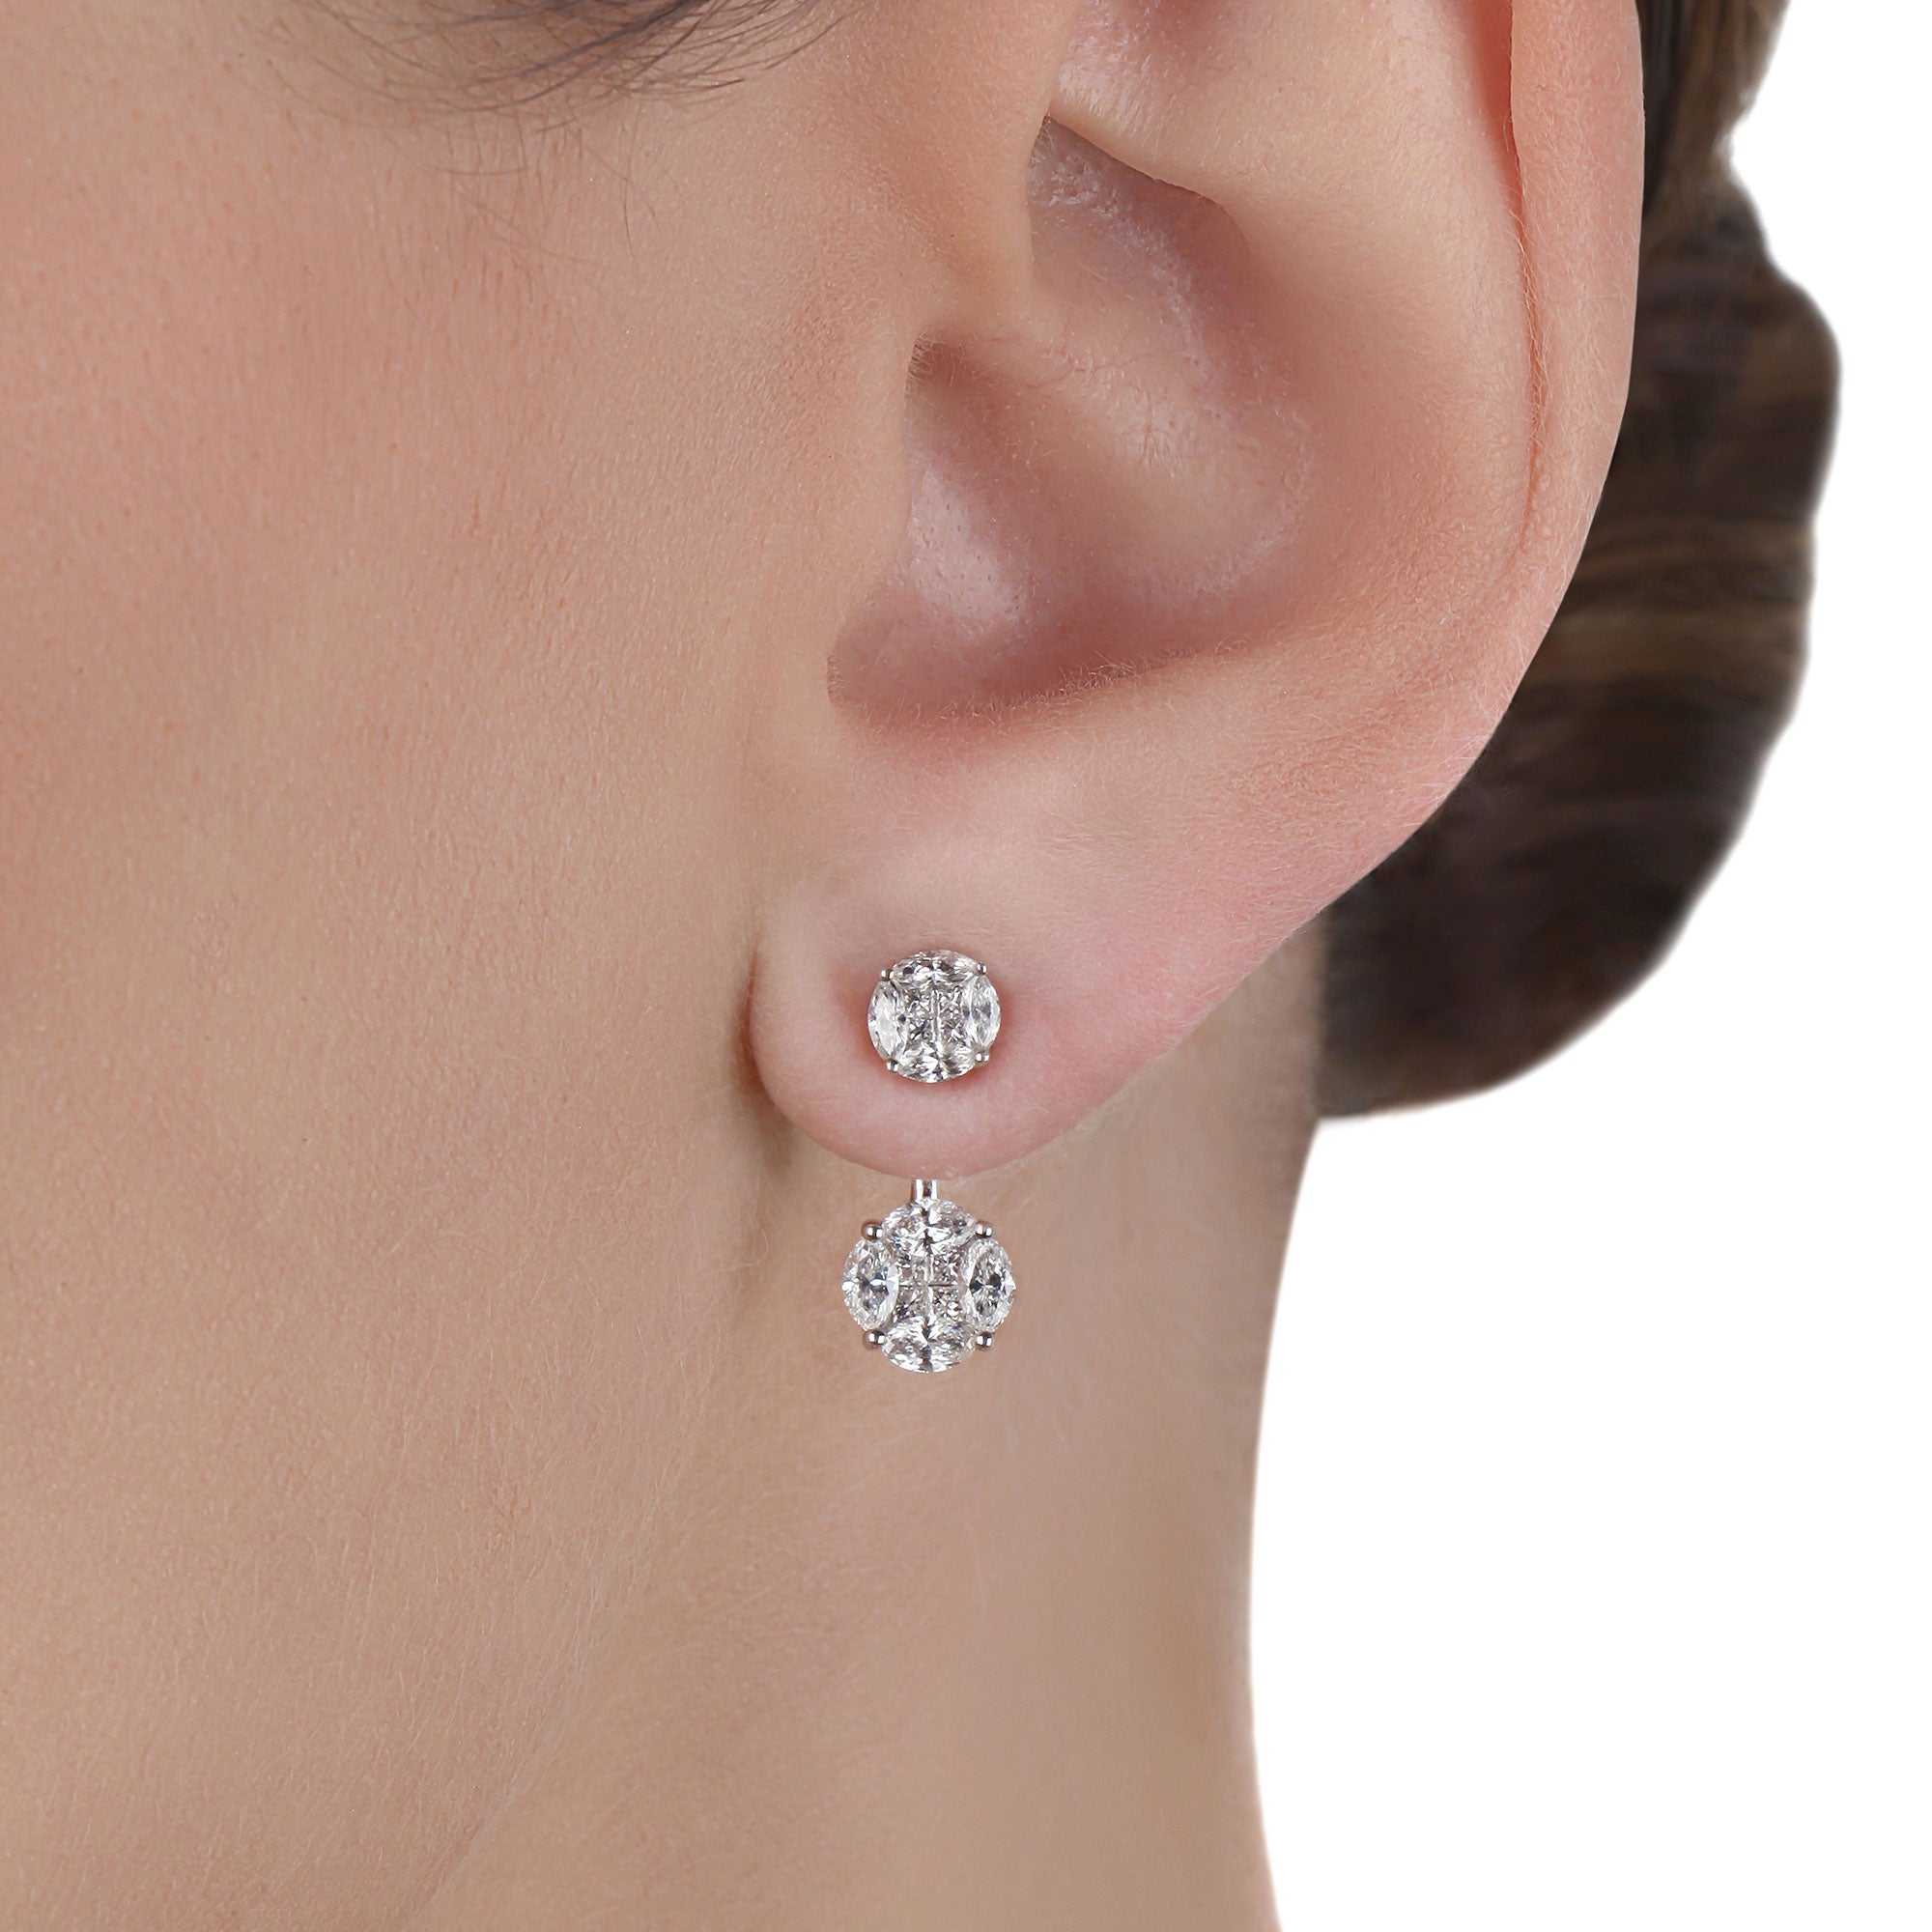 Attachable Illusion Diamond Stud Earrings | Jewelry shops online|